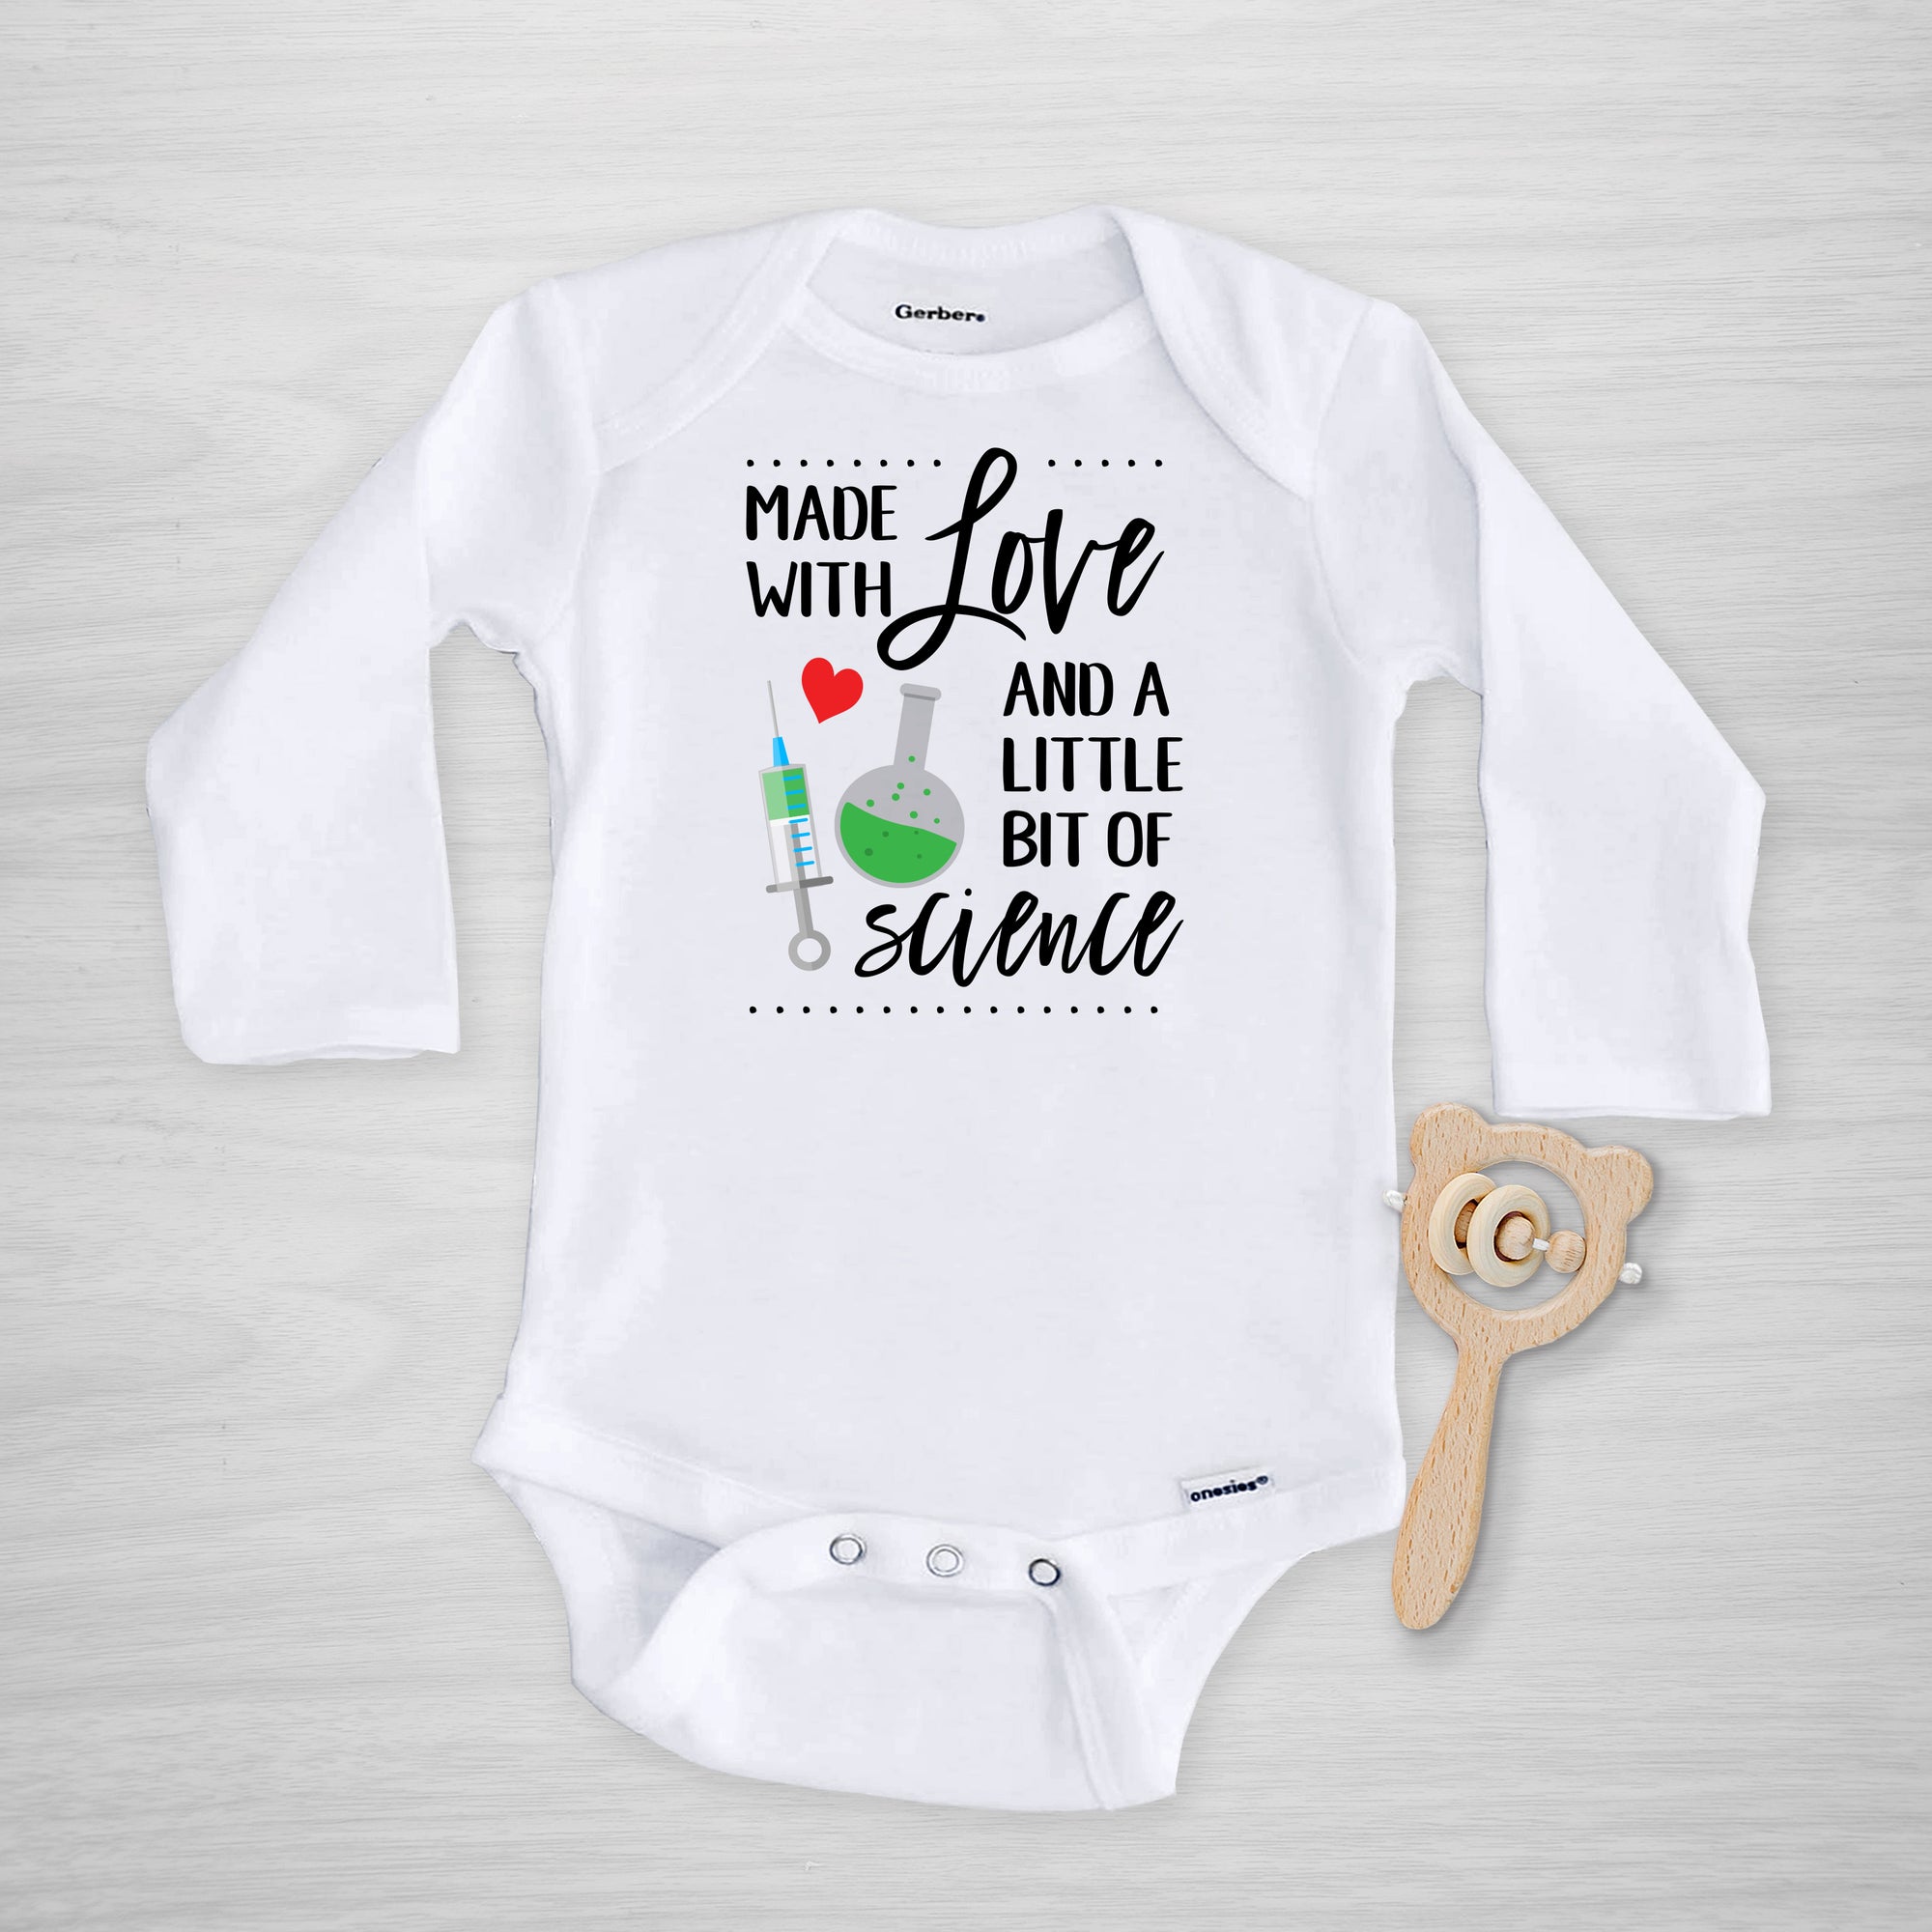 Made with Love and a little bit of Science Onesie, IVF Rainbow Baby, genuine Gerber Onesie®, short sleeved, Pipsy.com